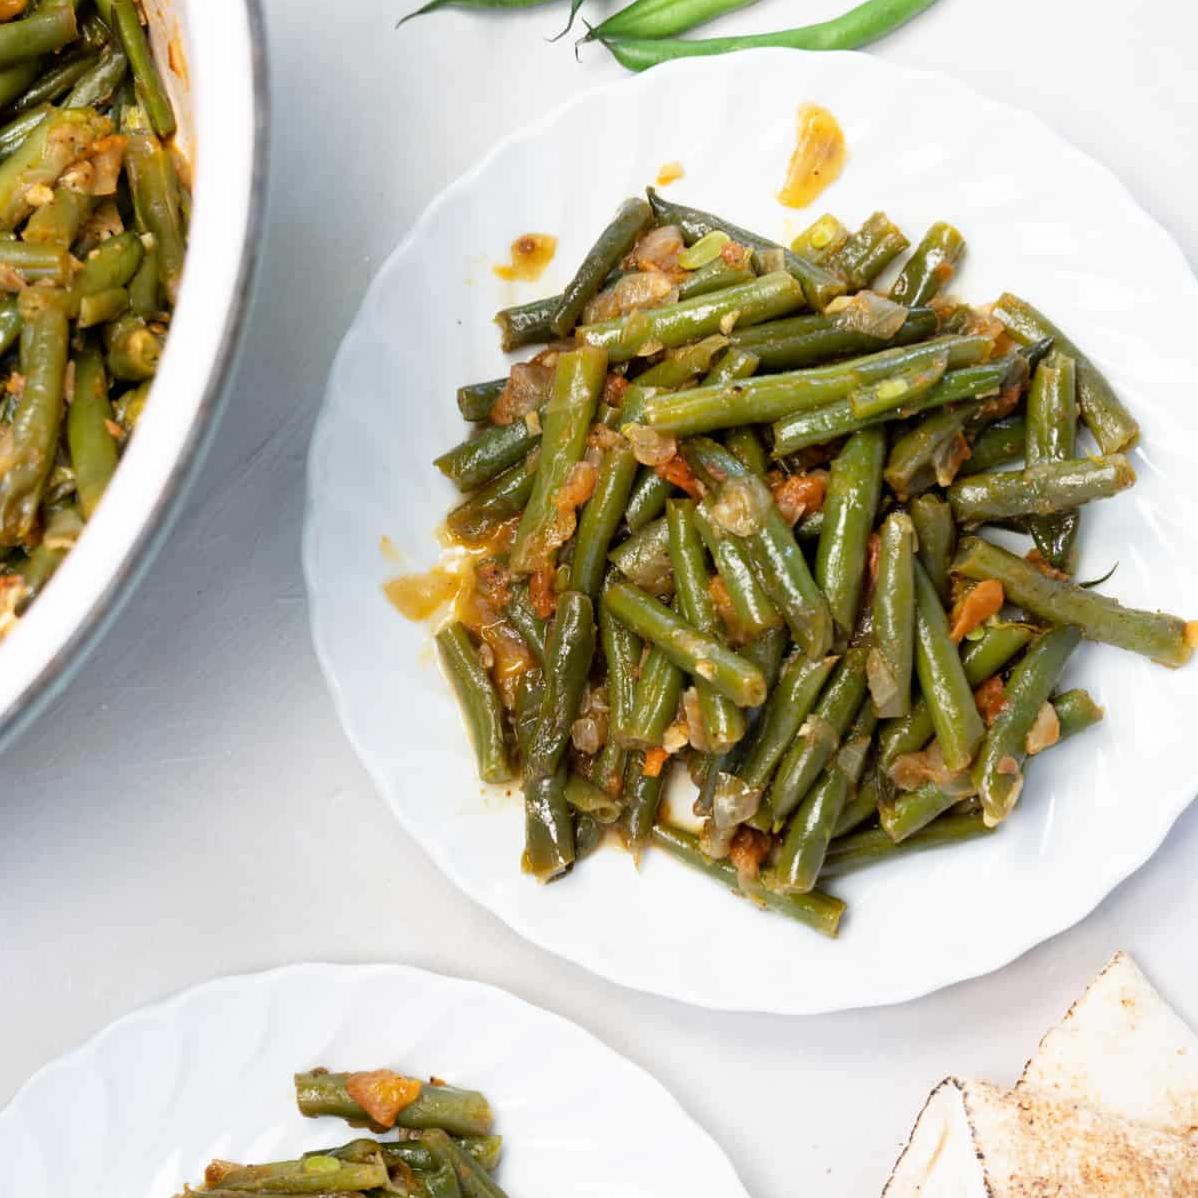  These healthy and flavorful veggies make for a perfect side dish to any meal.